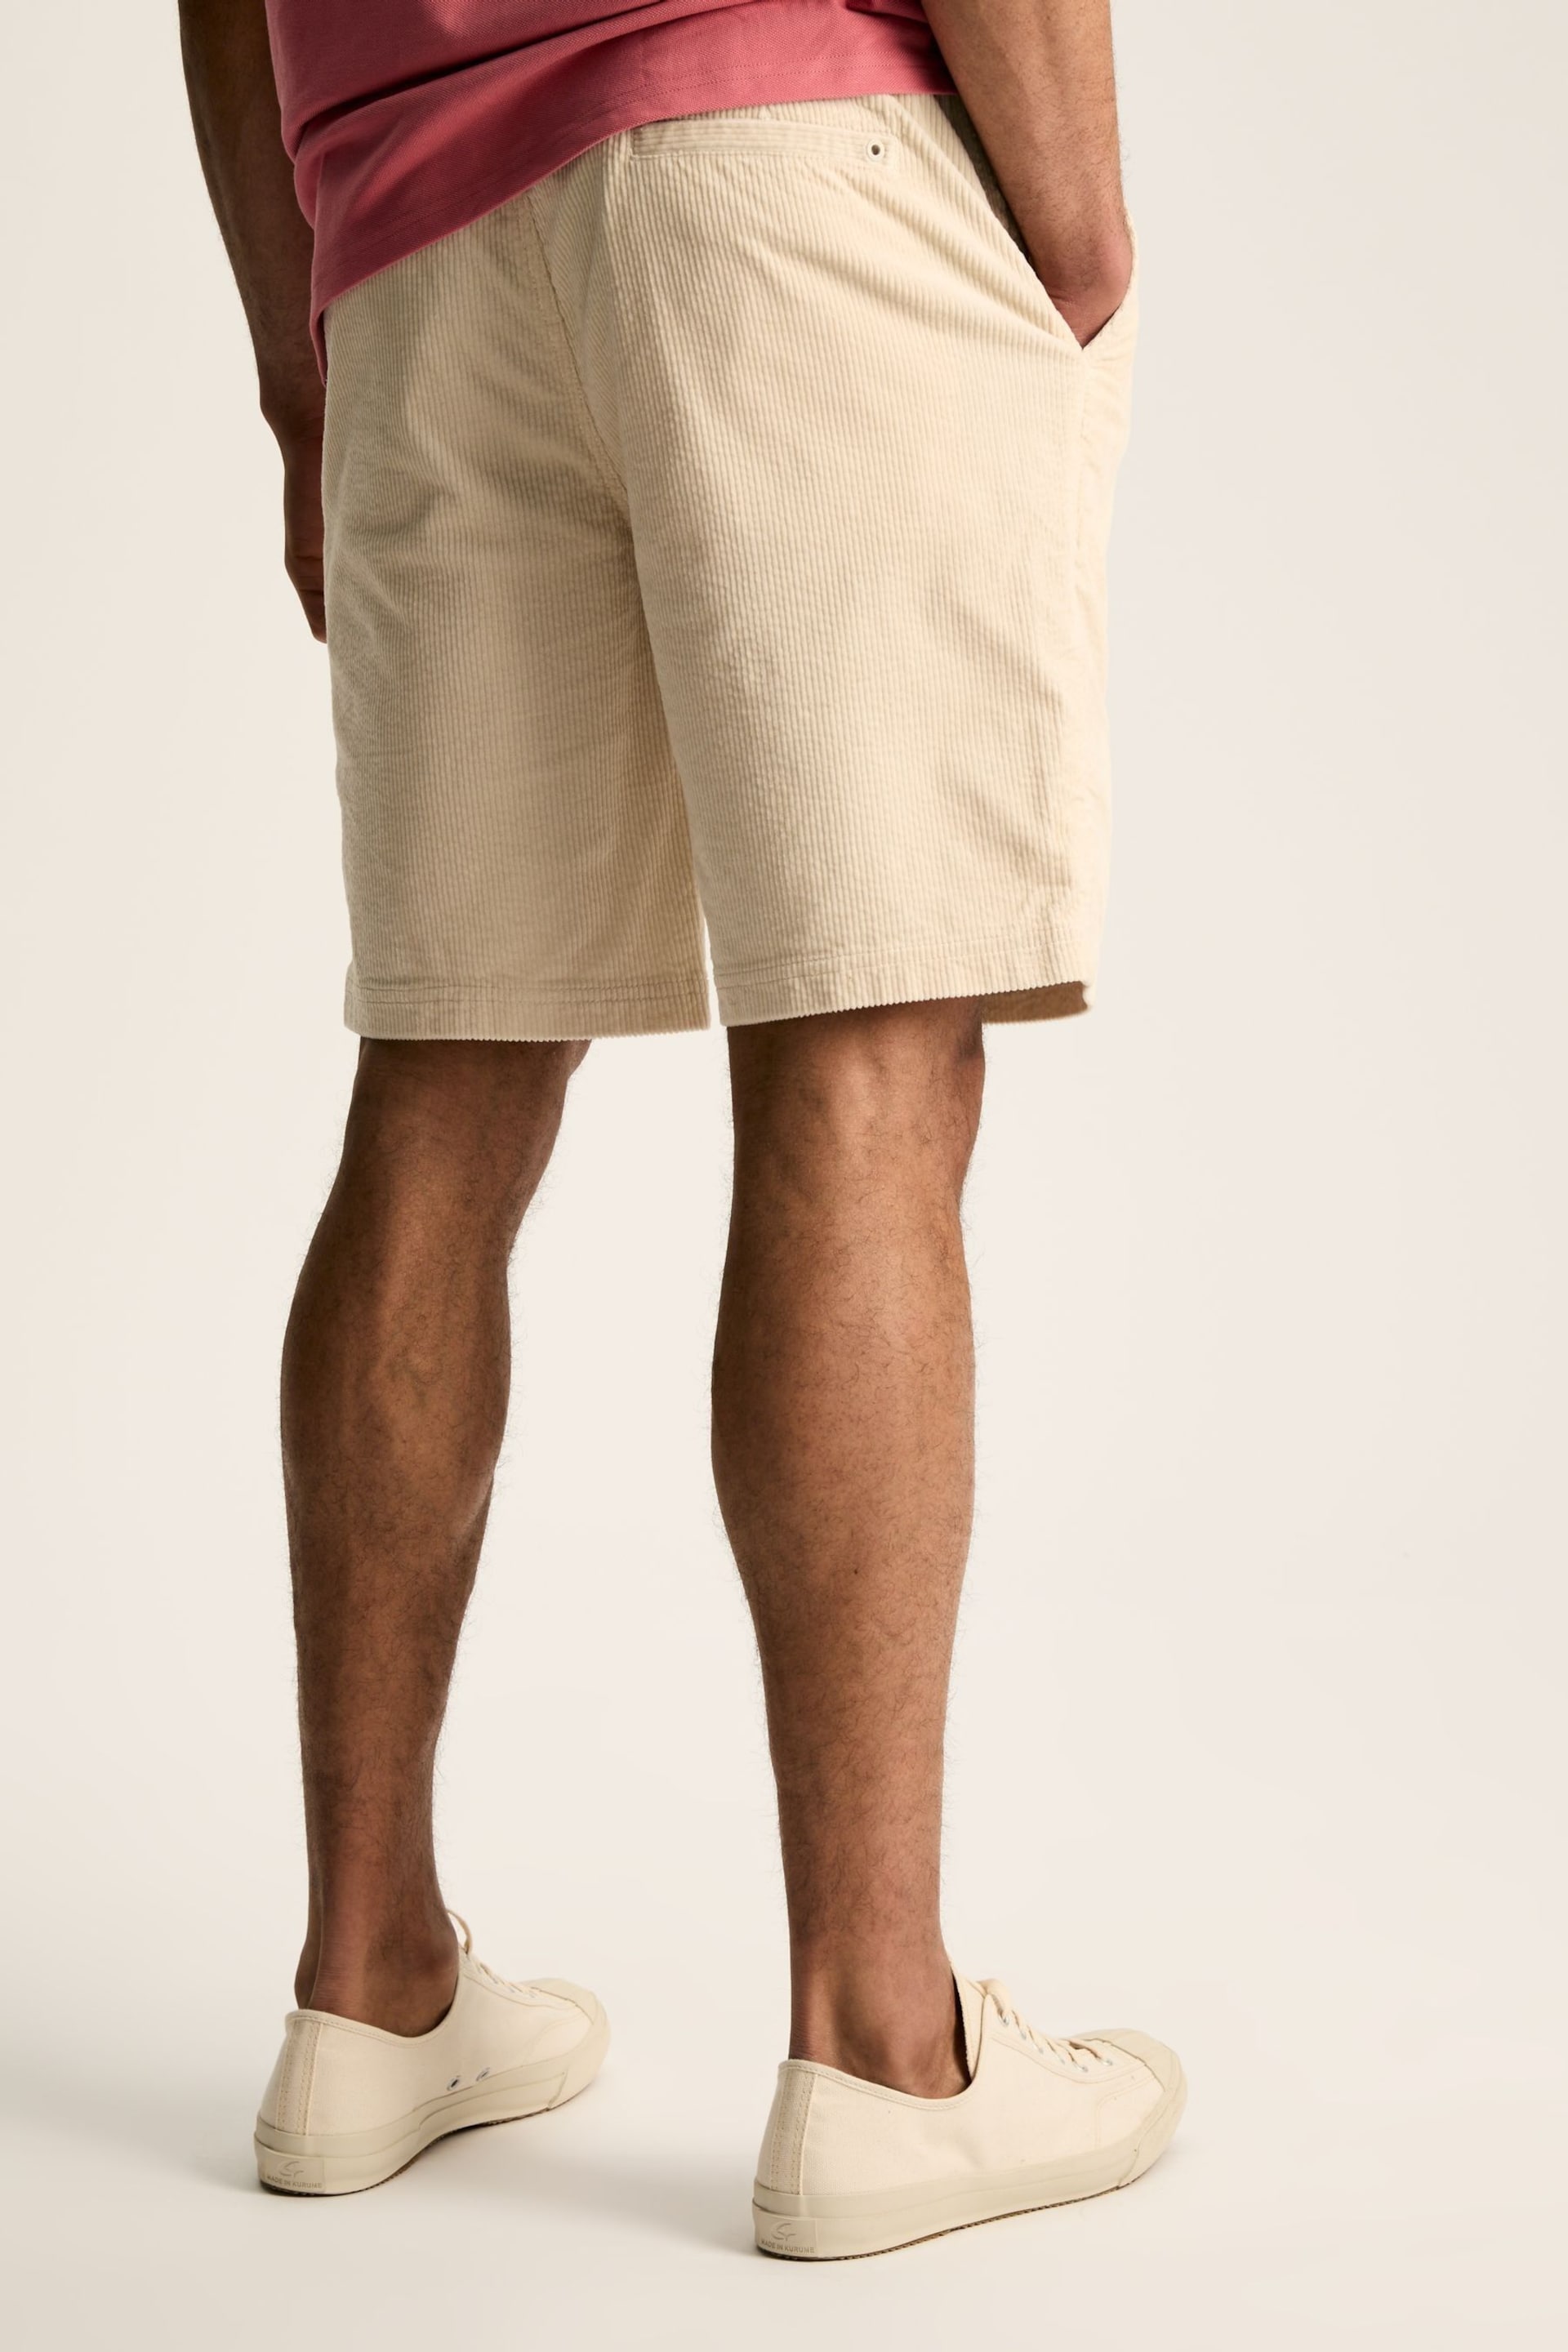 Joules Cord Cream Elasticated Waist Shorts - Image 2 of 6